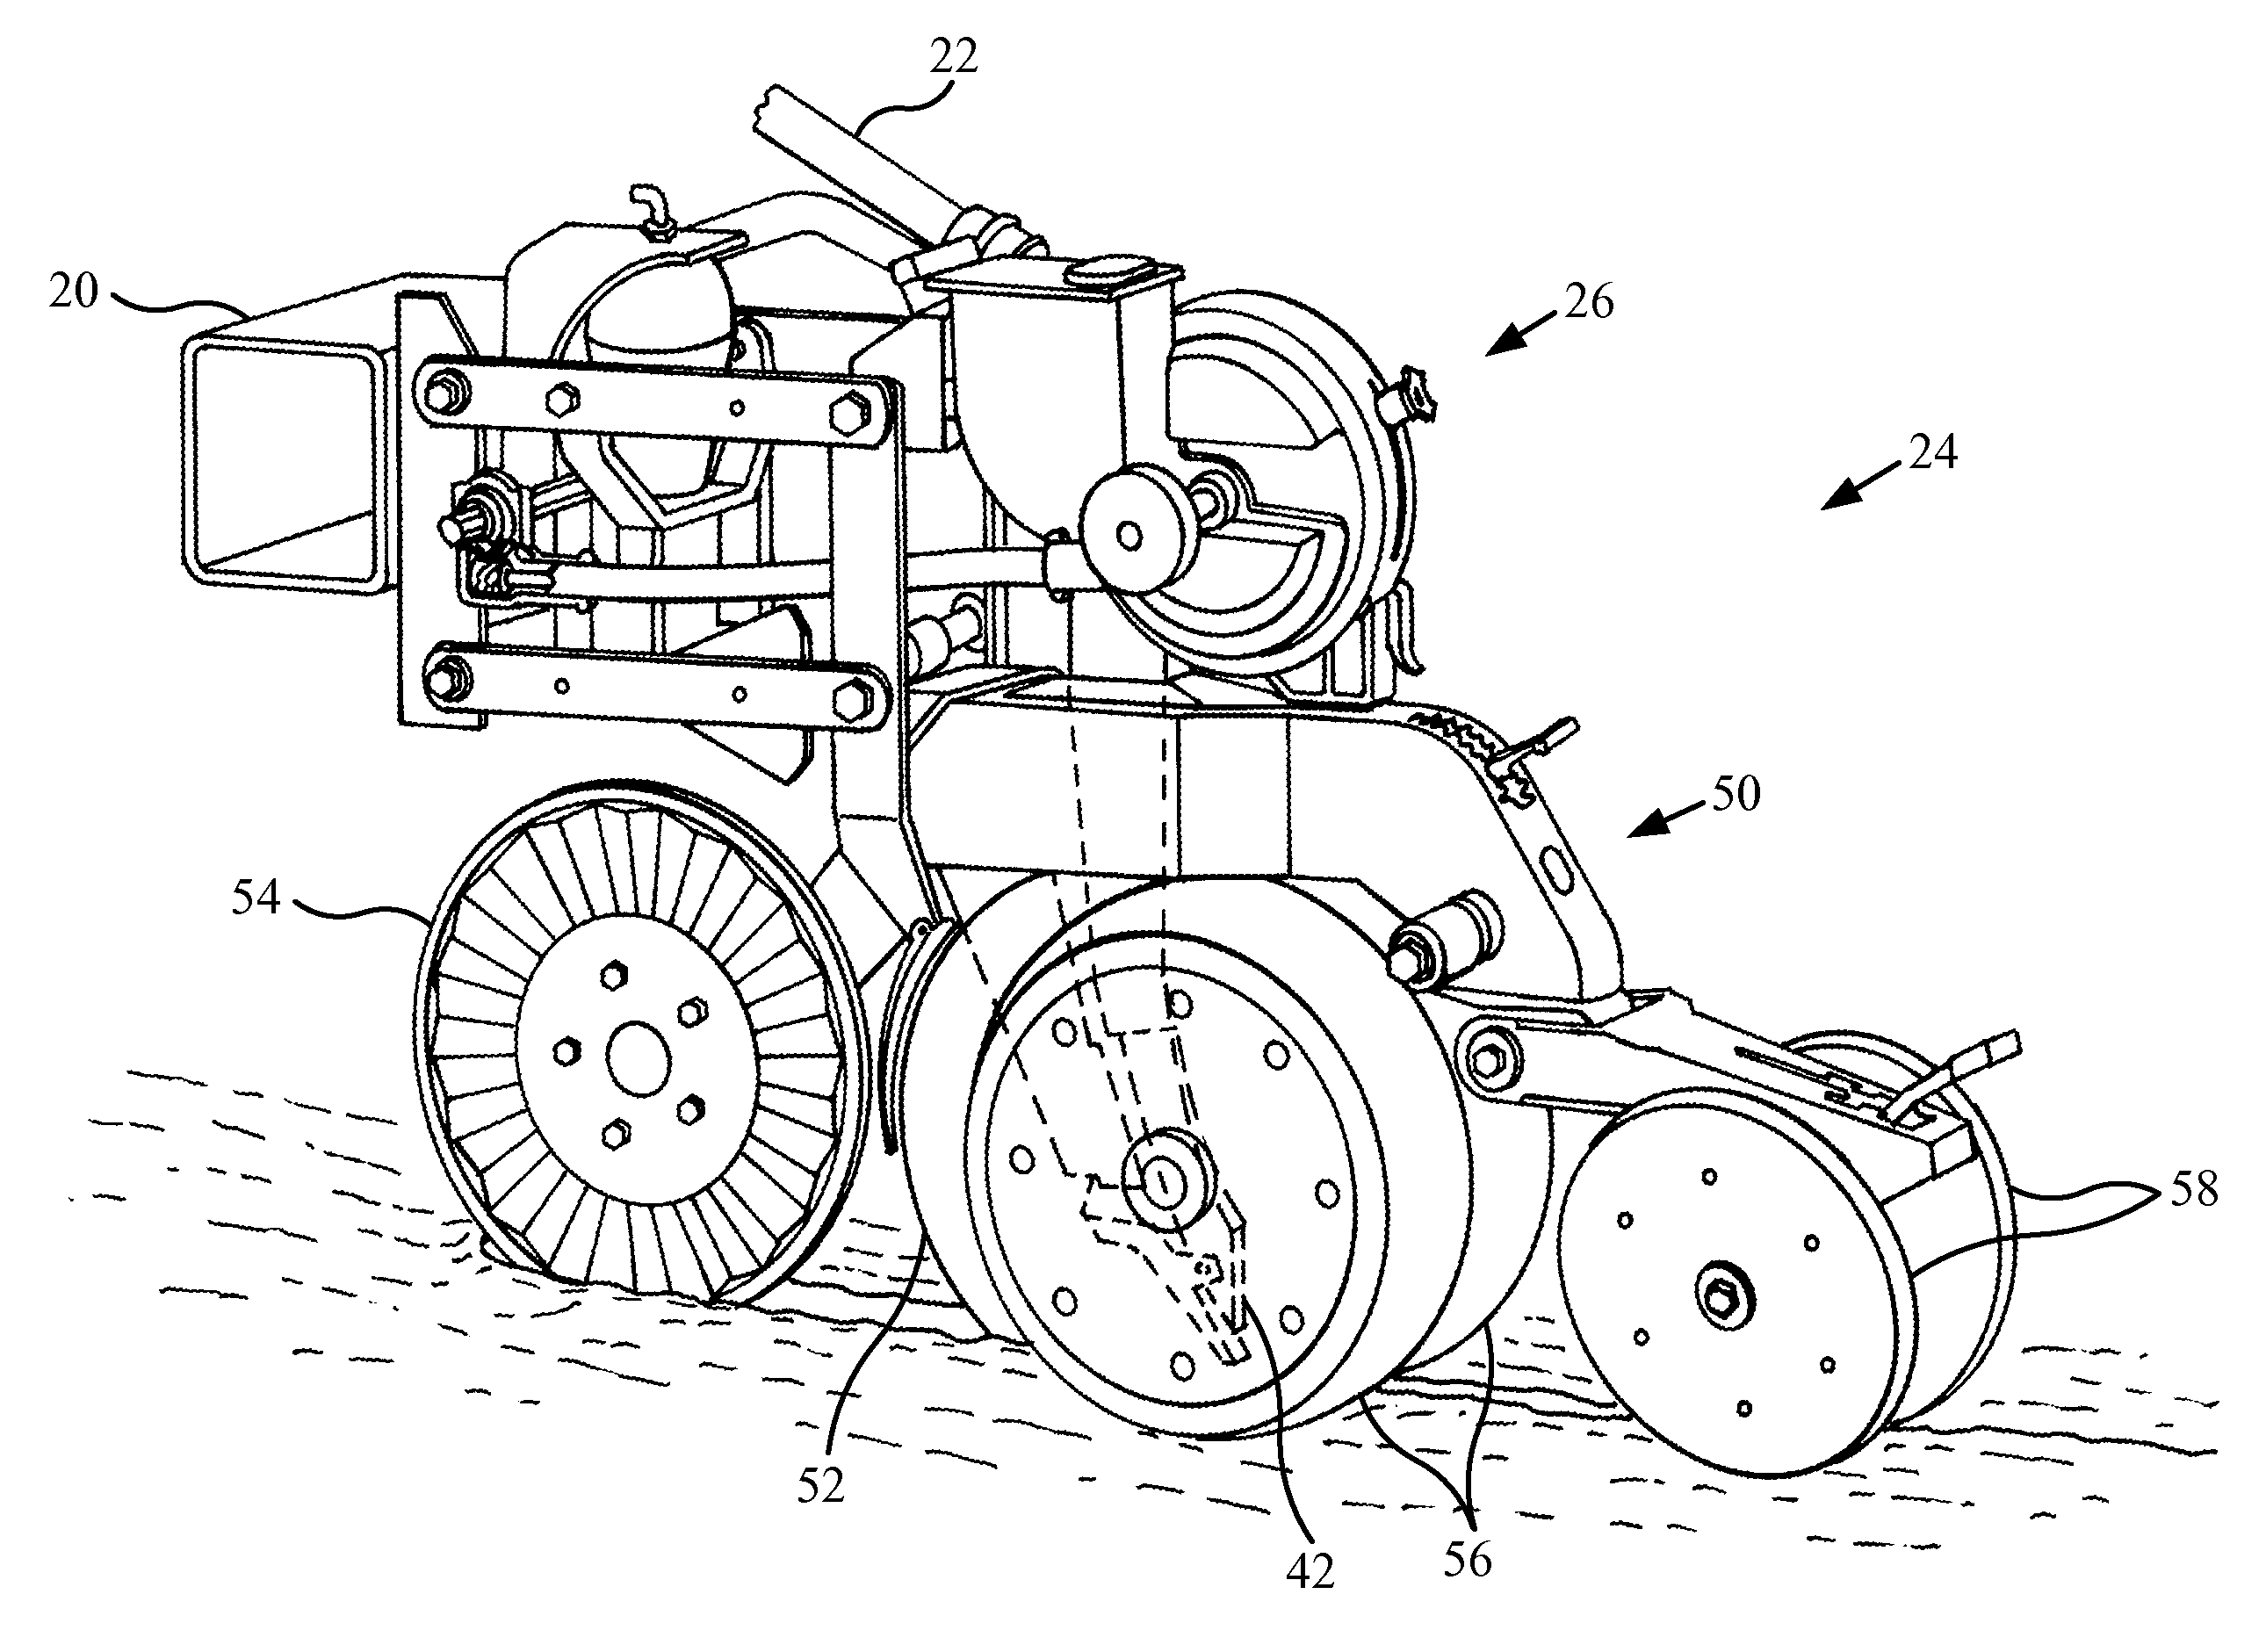 Agricultural seeding system